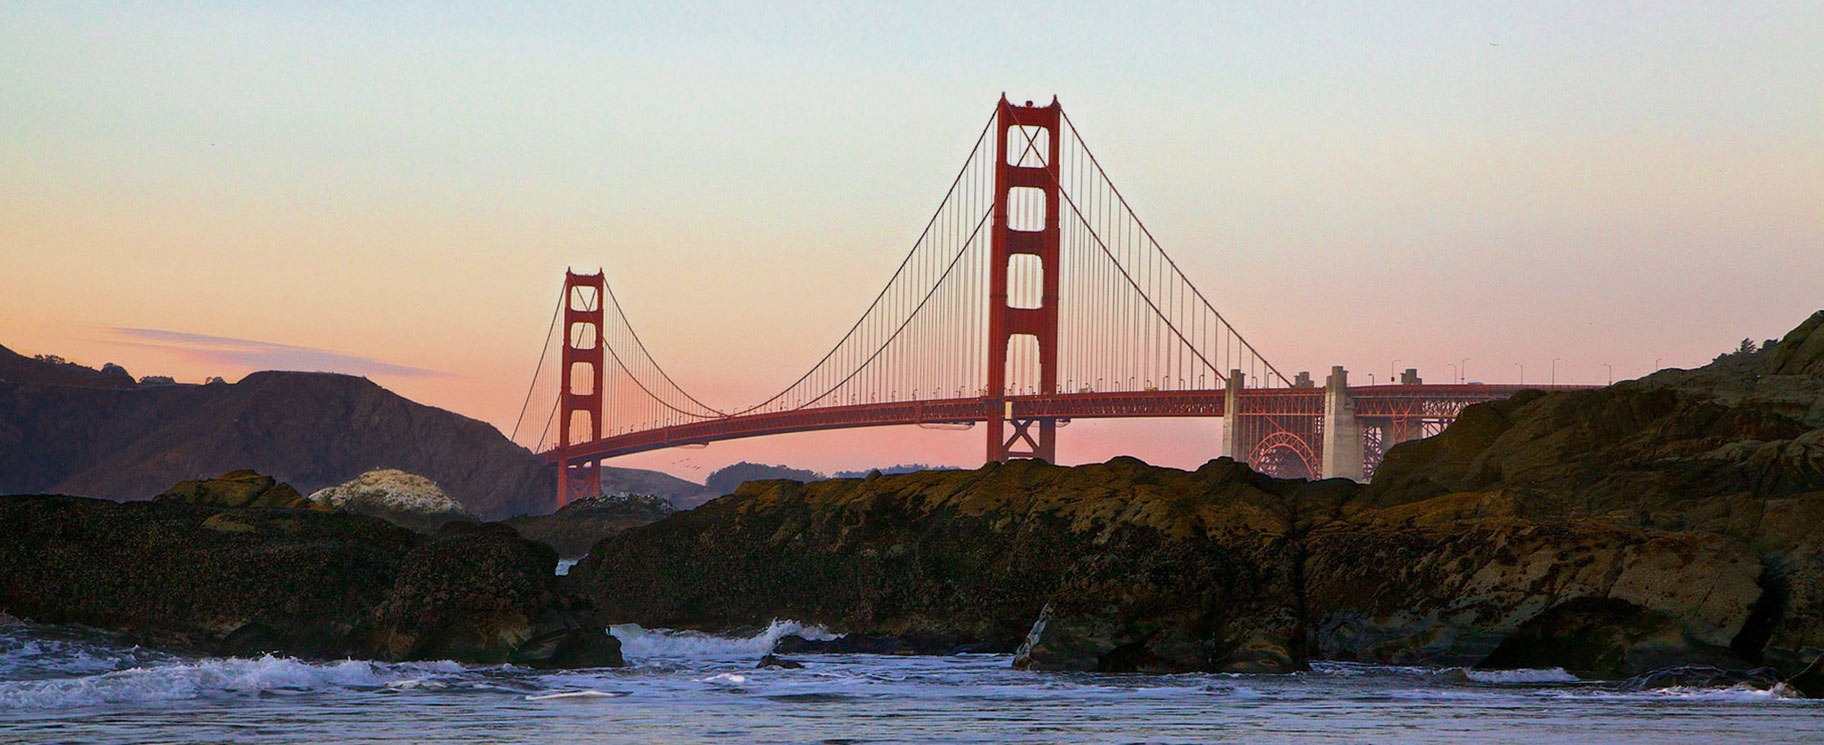 Leaving The Bay Area - Real Estate Solutions For Your Next Life Move